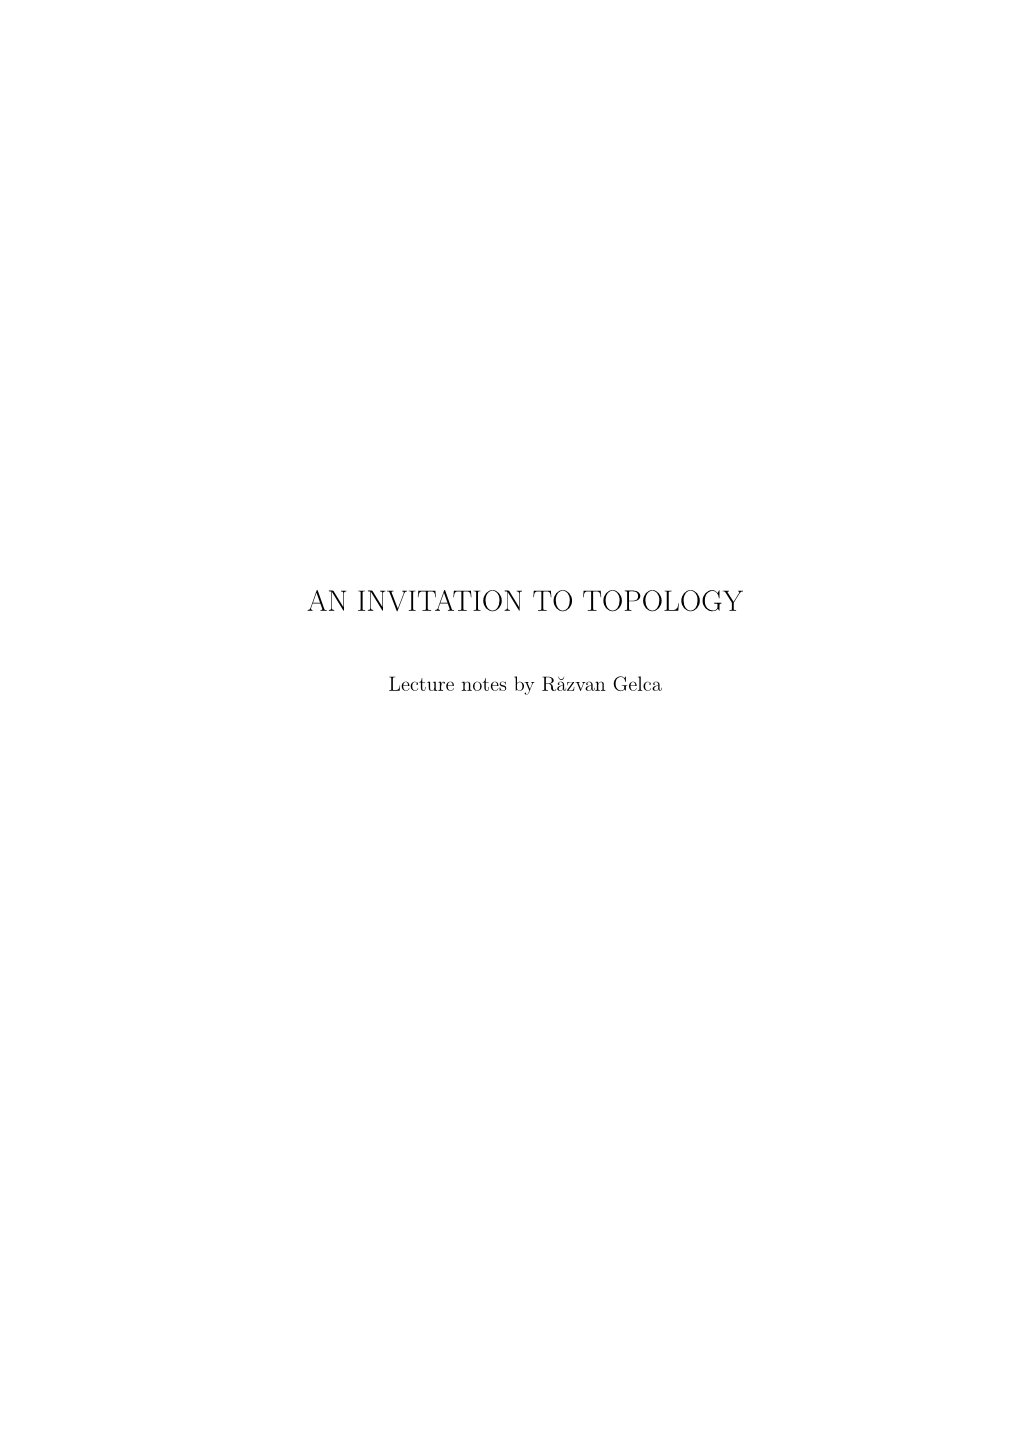 An Invitation to Topology